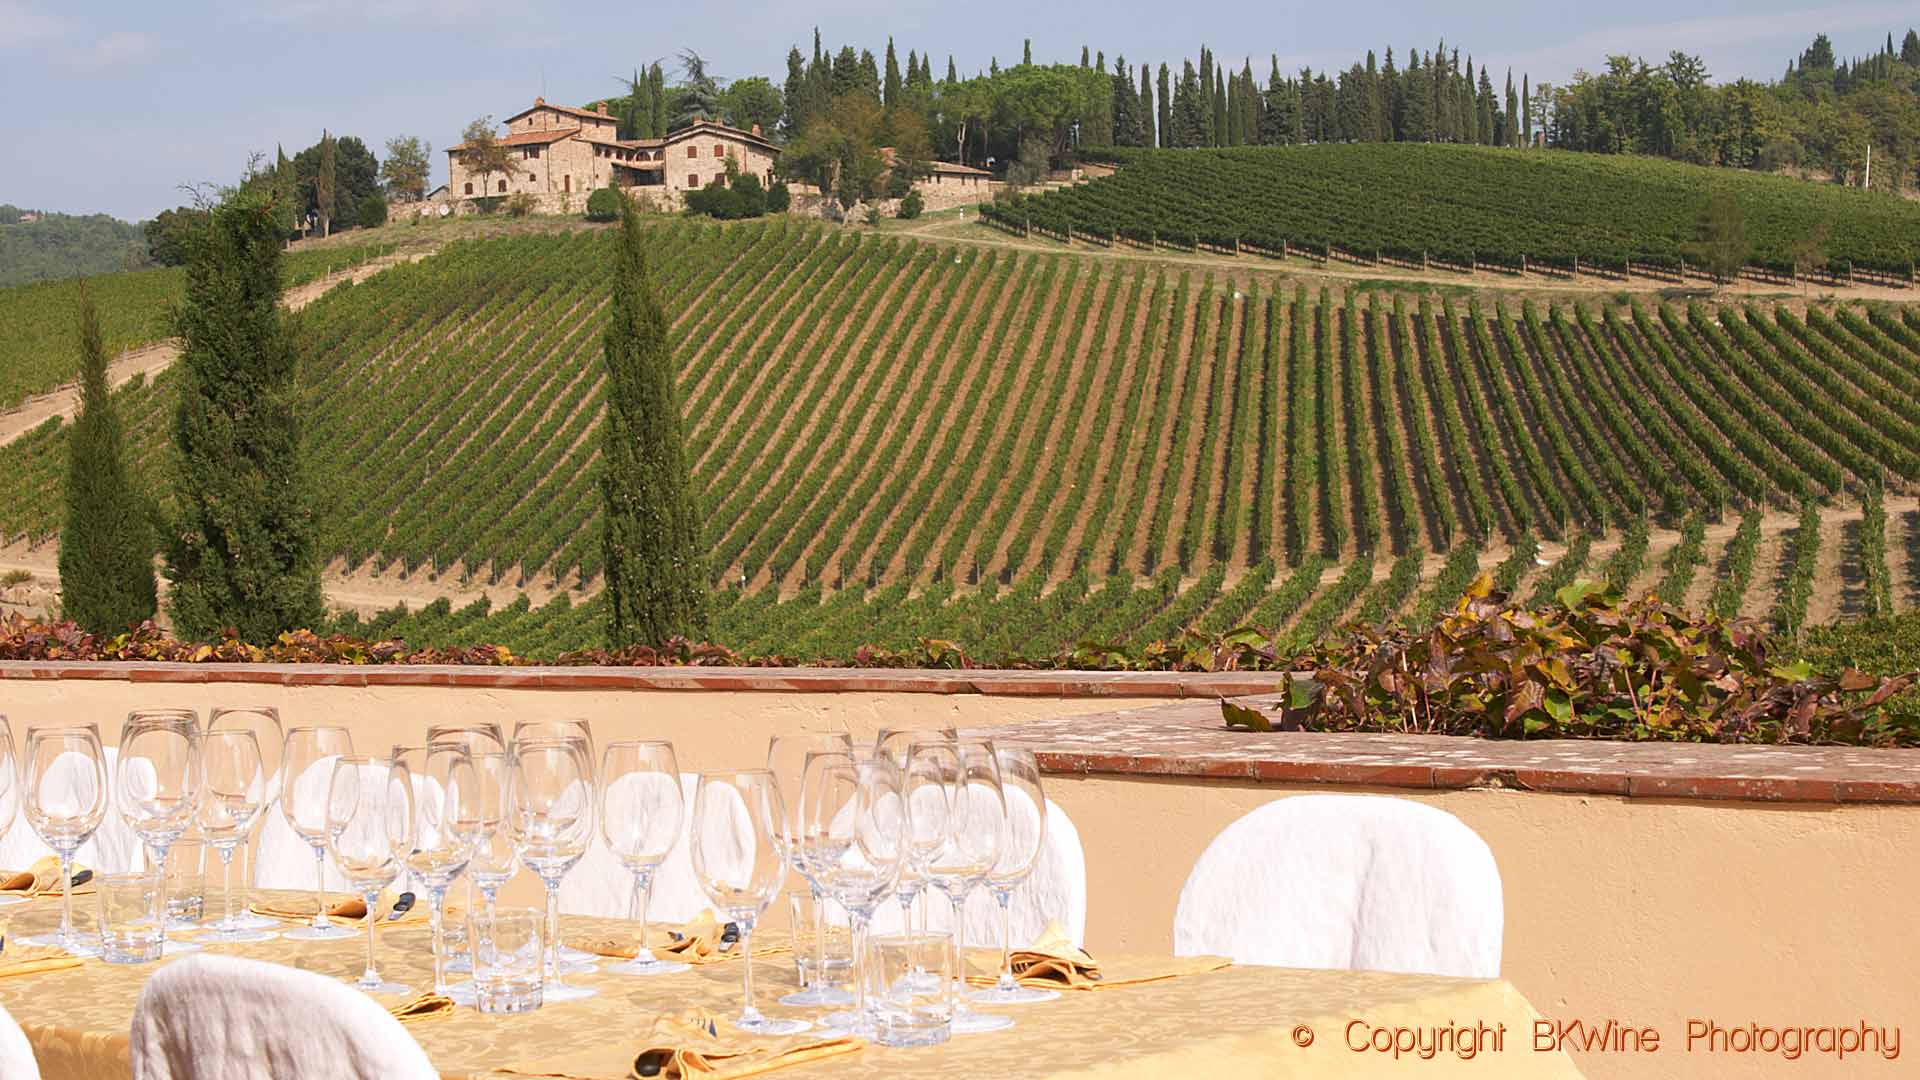 Lunch is ready on the terrace with a view over the Tuscan vineyards